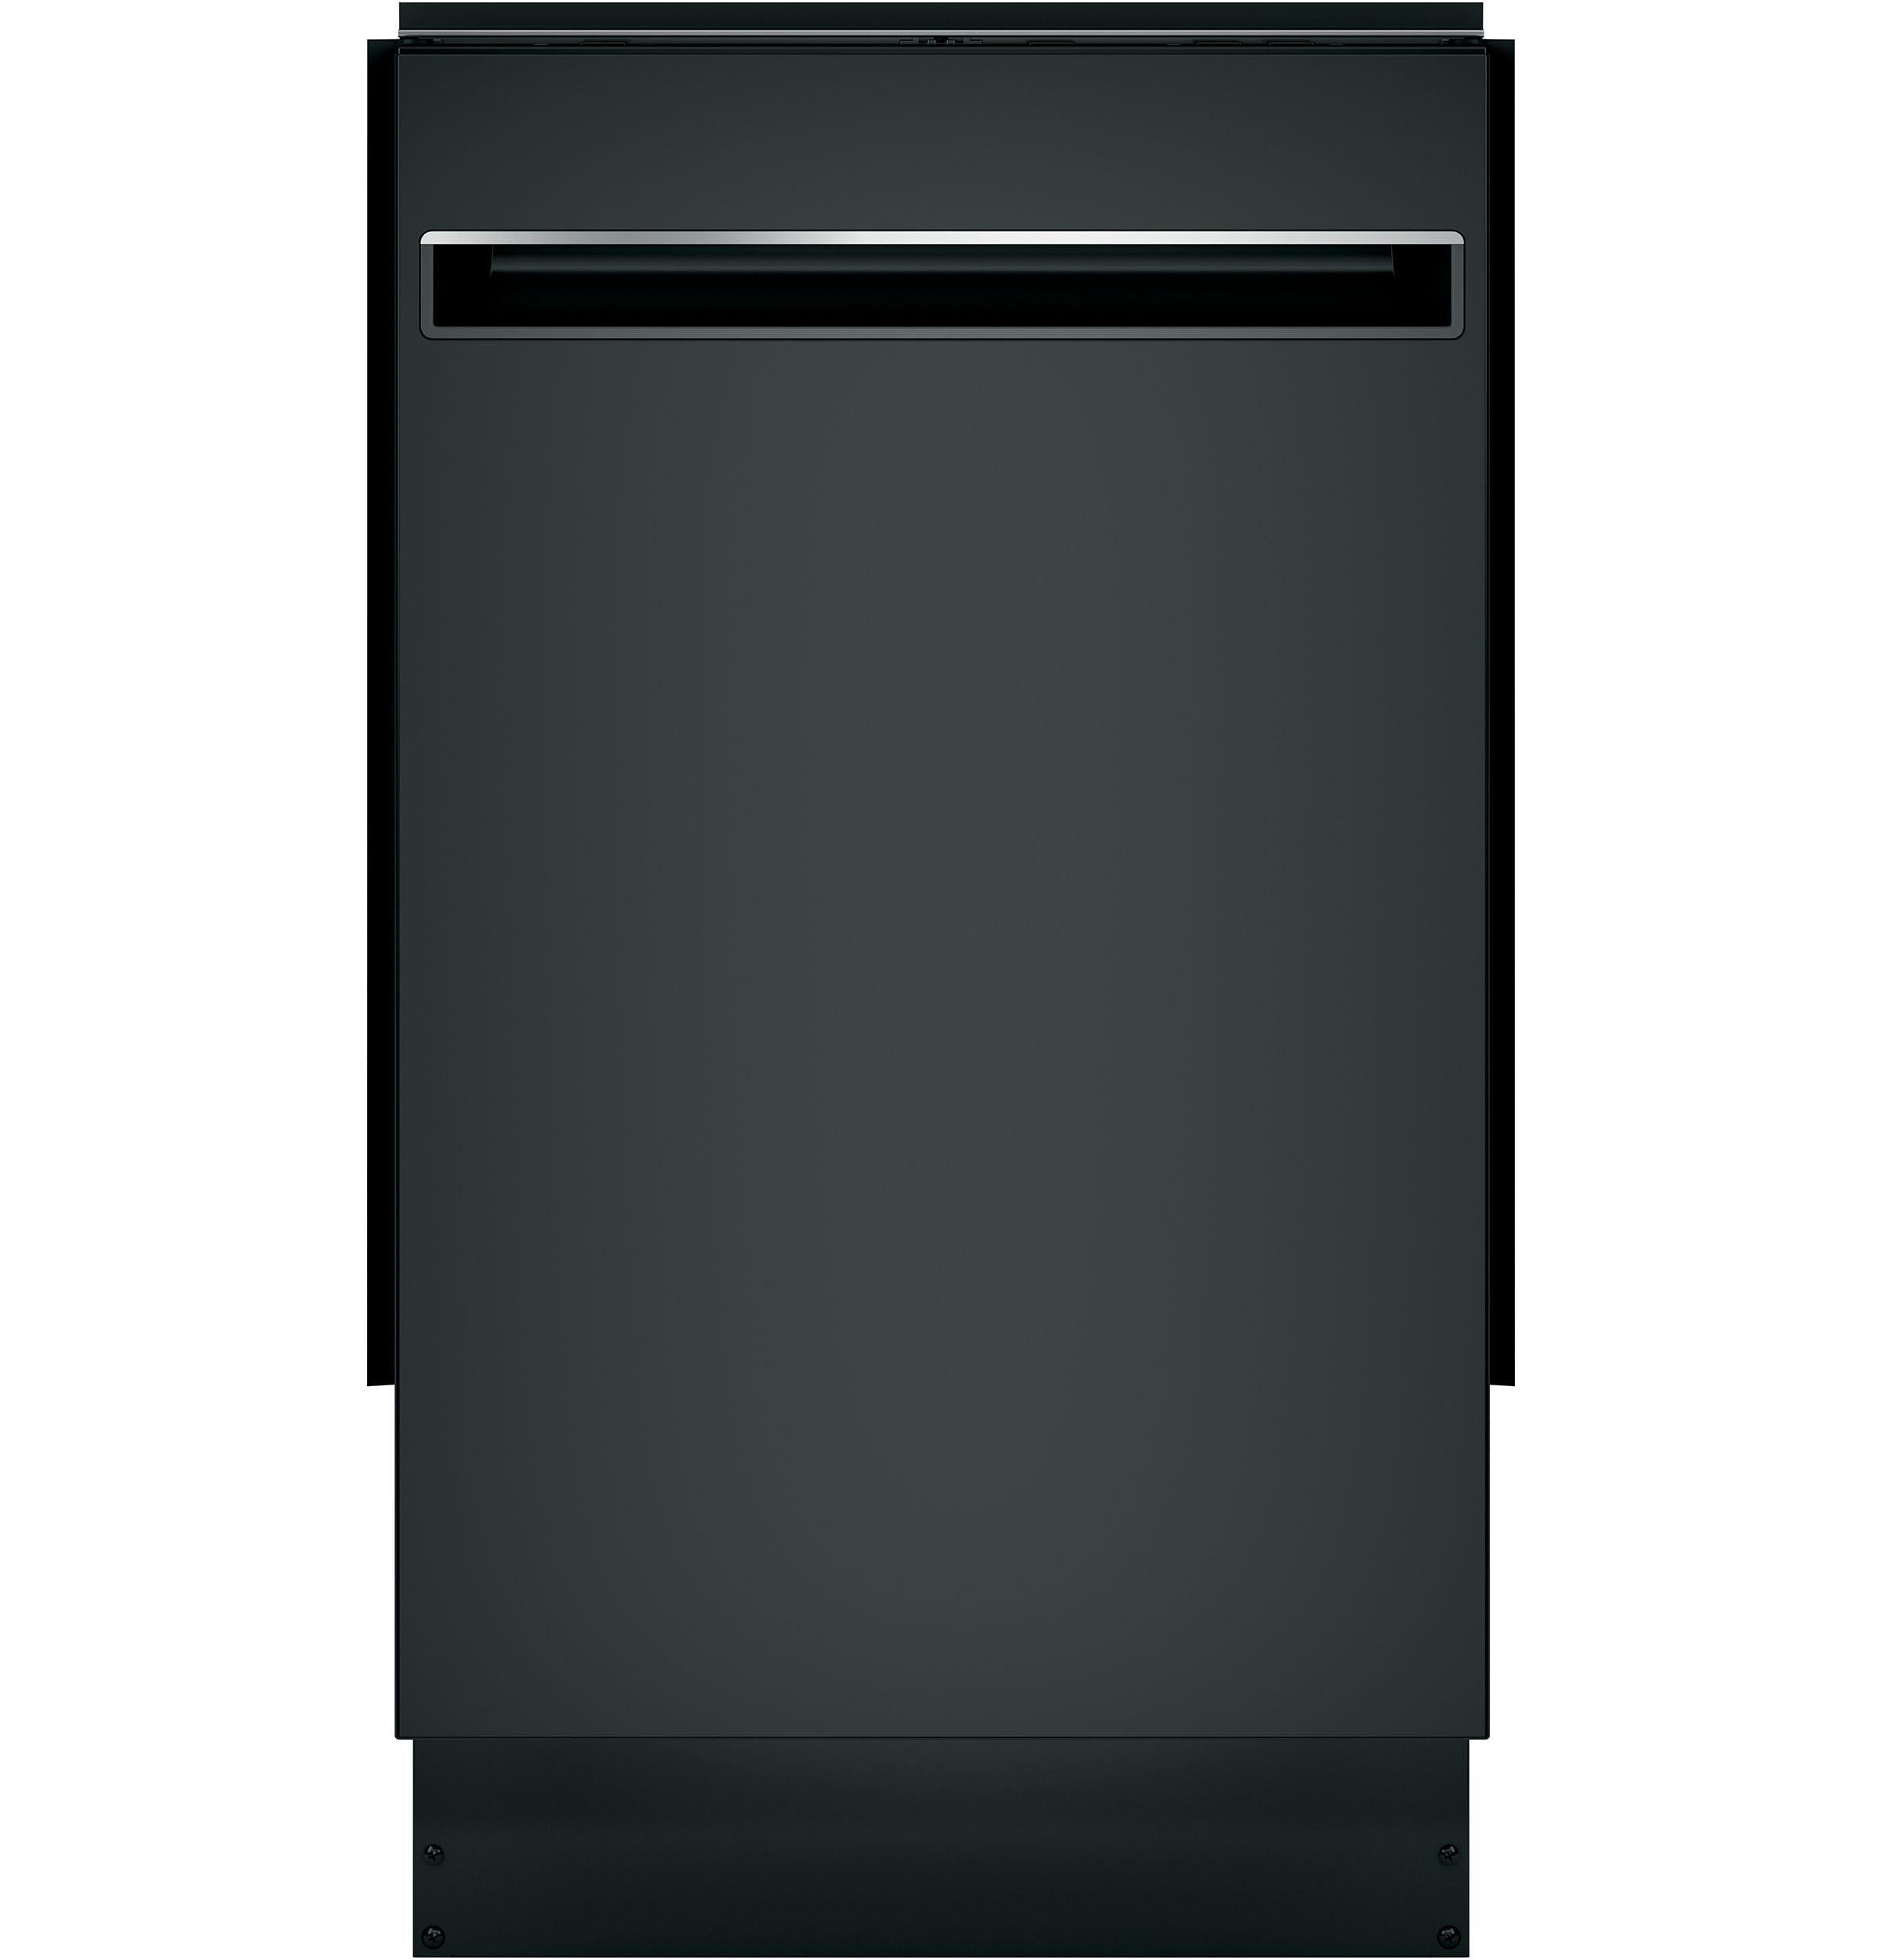 GE Profile™ ENERGY STAR® 18" ADA Compliant Stainless Steel Interior Dishwasher with Sanitize Cycle